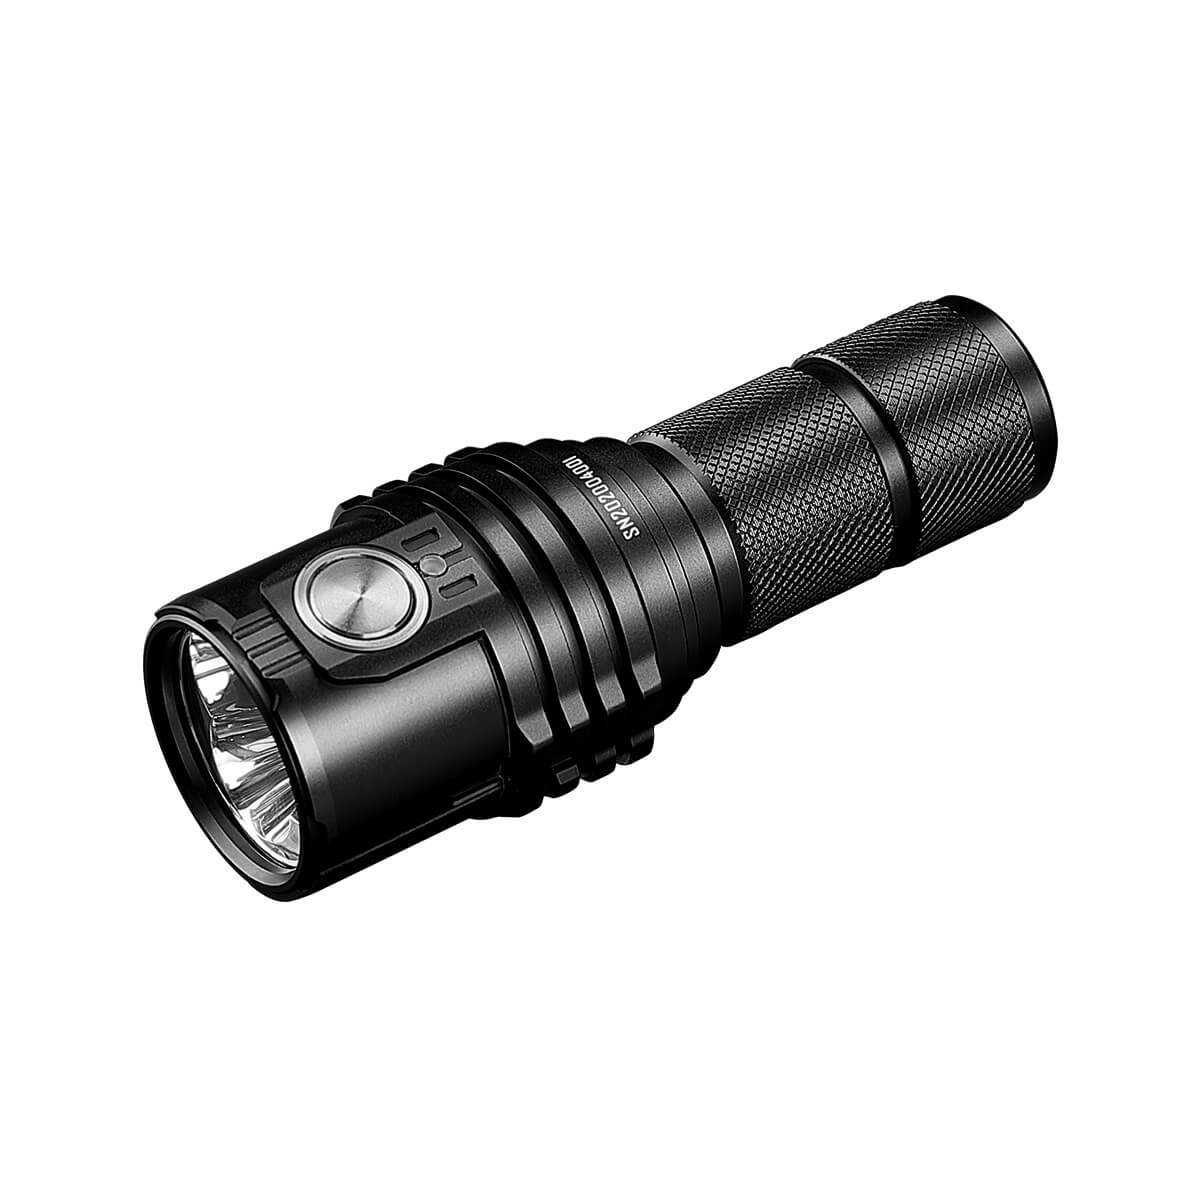 Imalent MS03 Rechargeable 13000 Lumen Compact Torch - 324 Metres